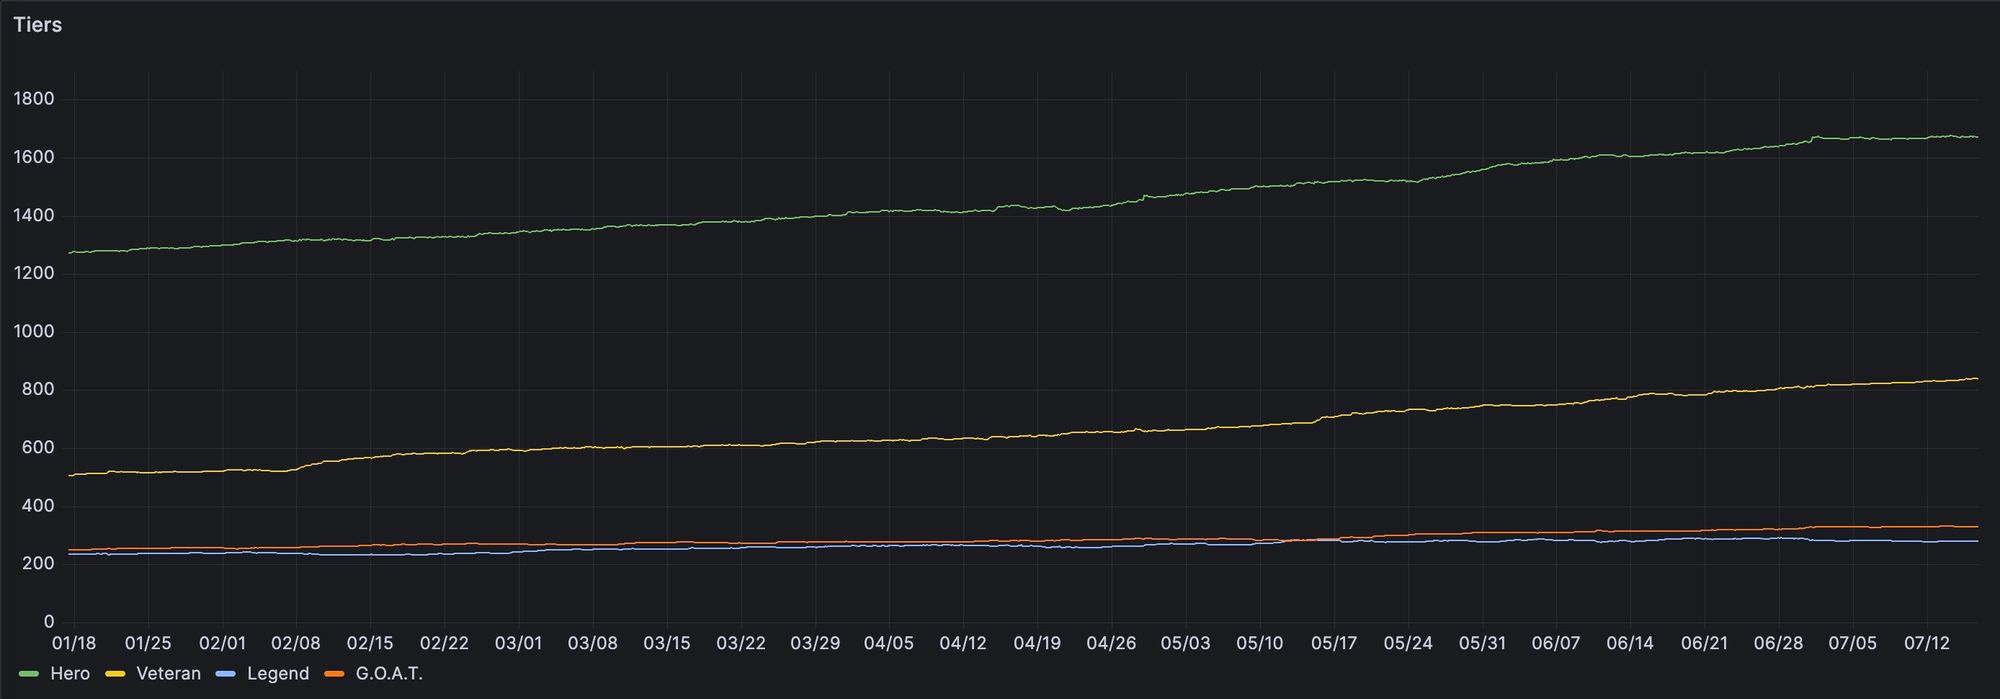 Plutus Staking Tiers Trend January to July 2023 (Credits: grafana.stevens.se)